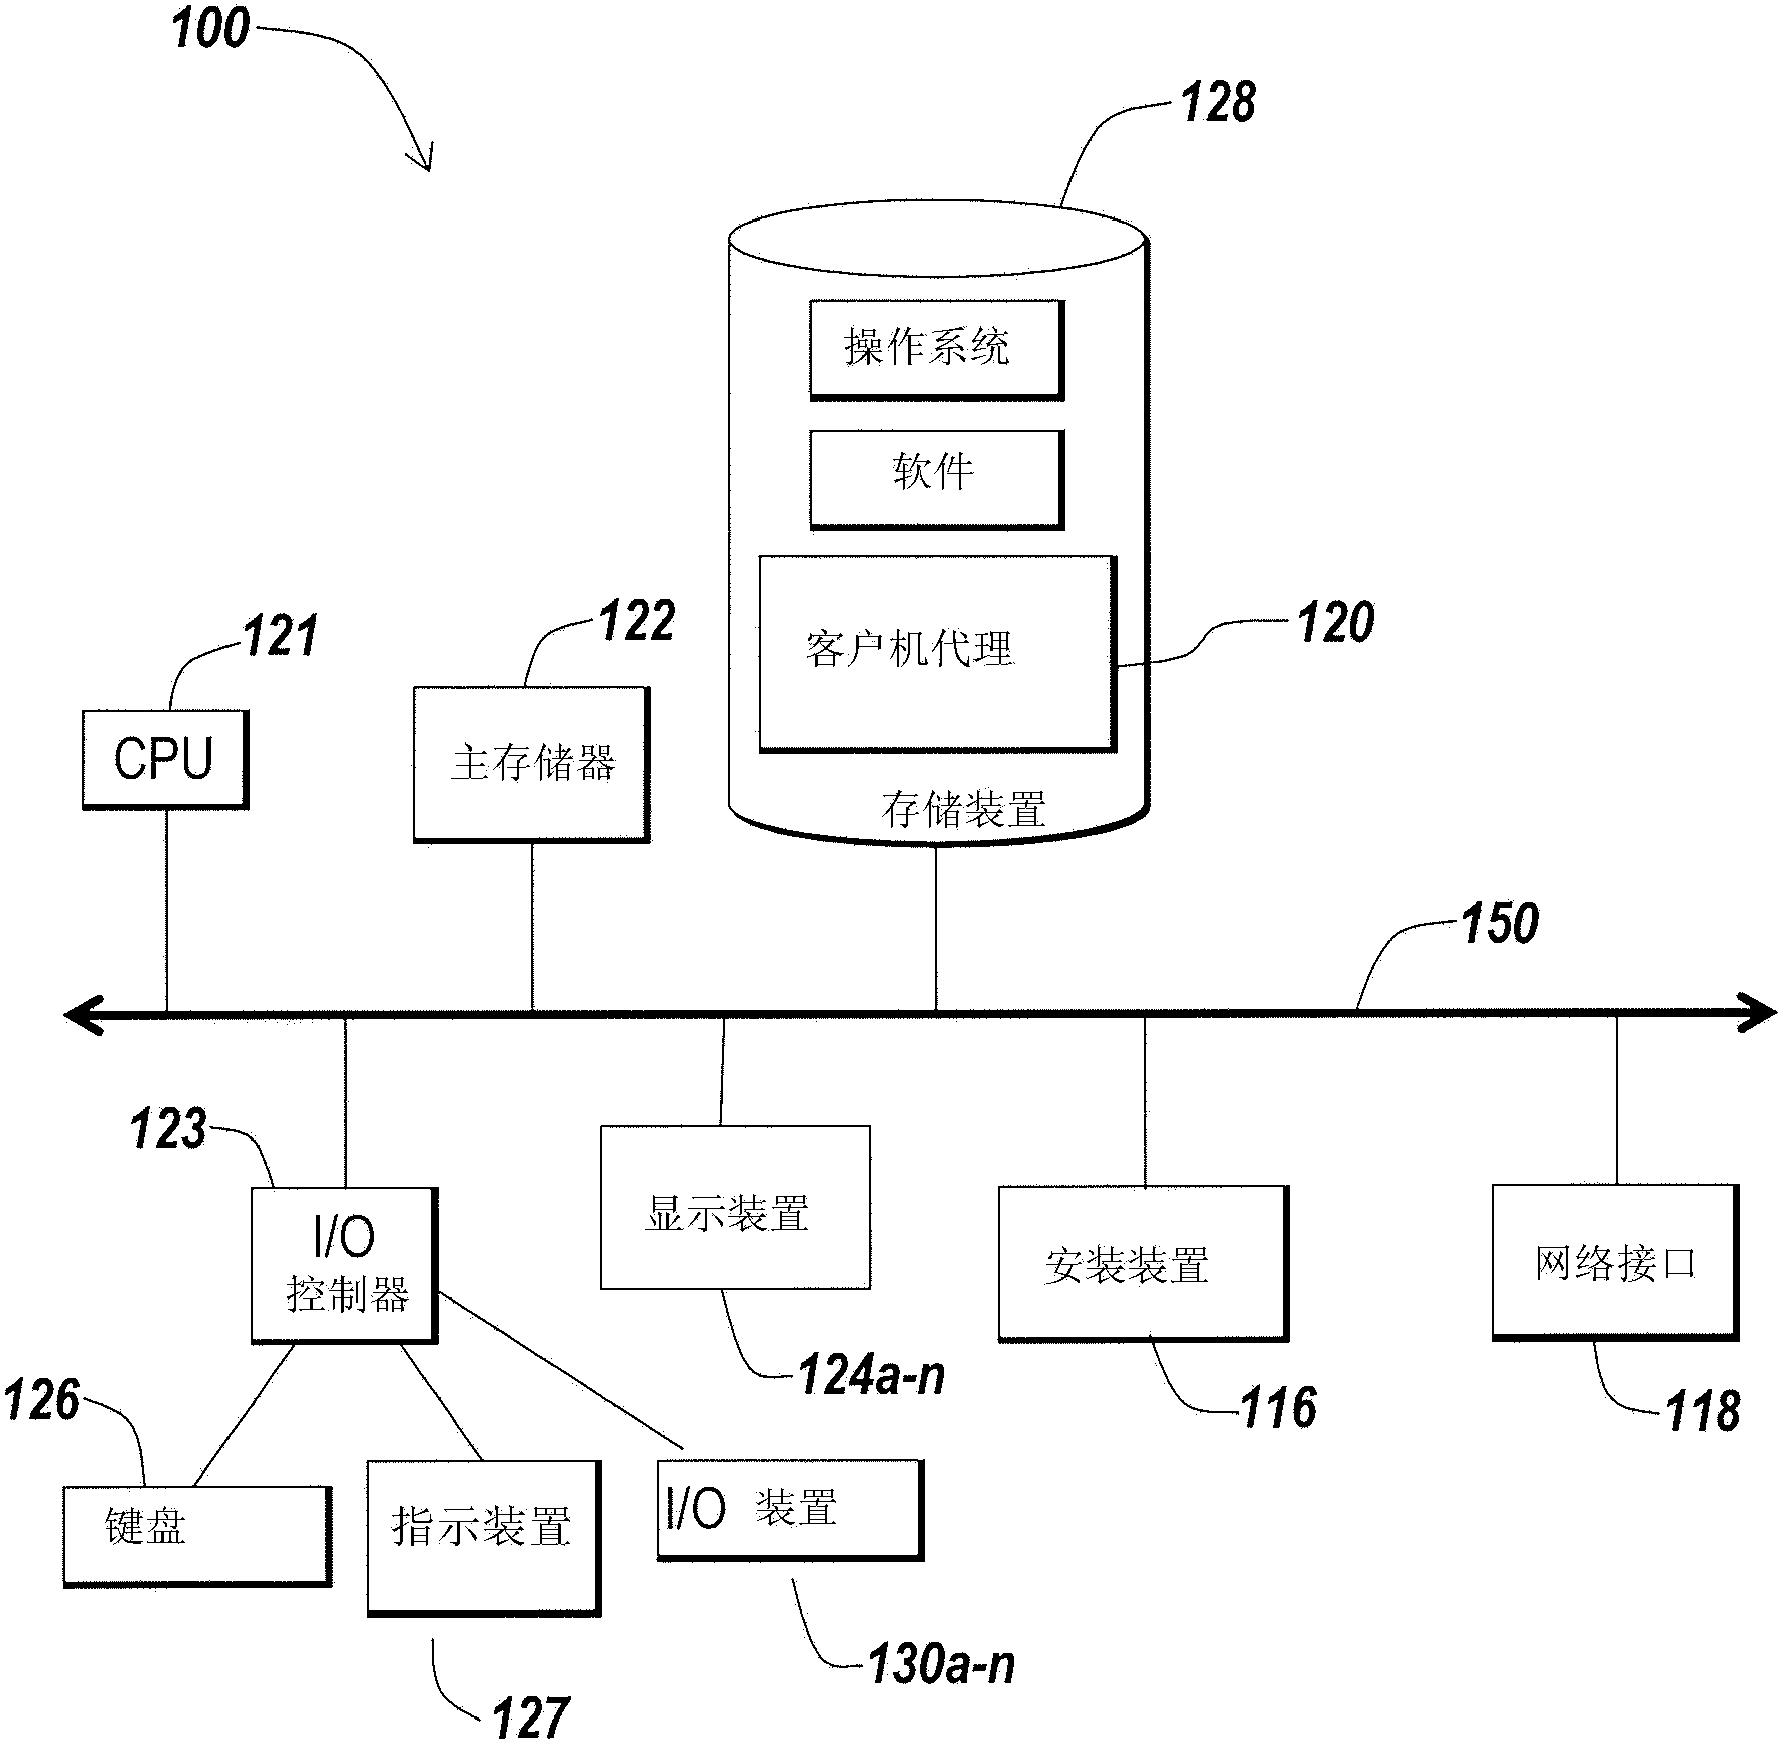 Methods and systems for displaying, on a first machine, data associated with a drive of a second machine, without mapping the drive